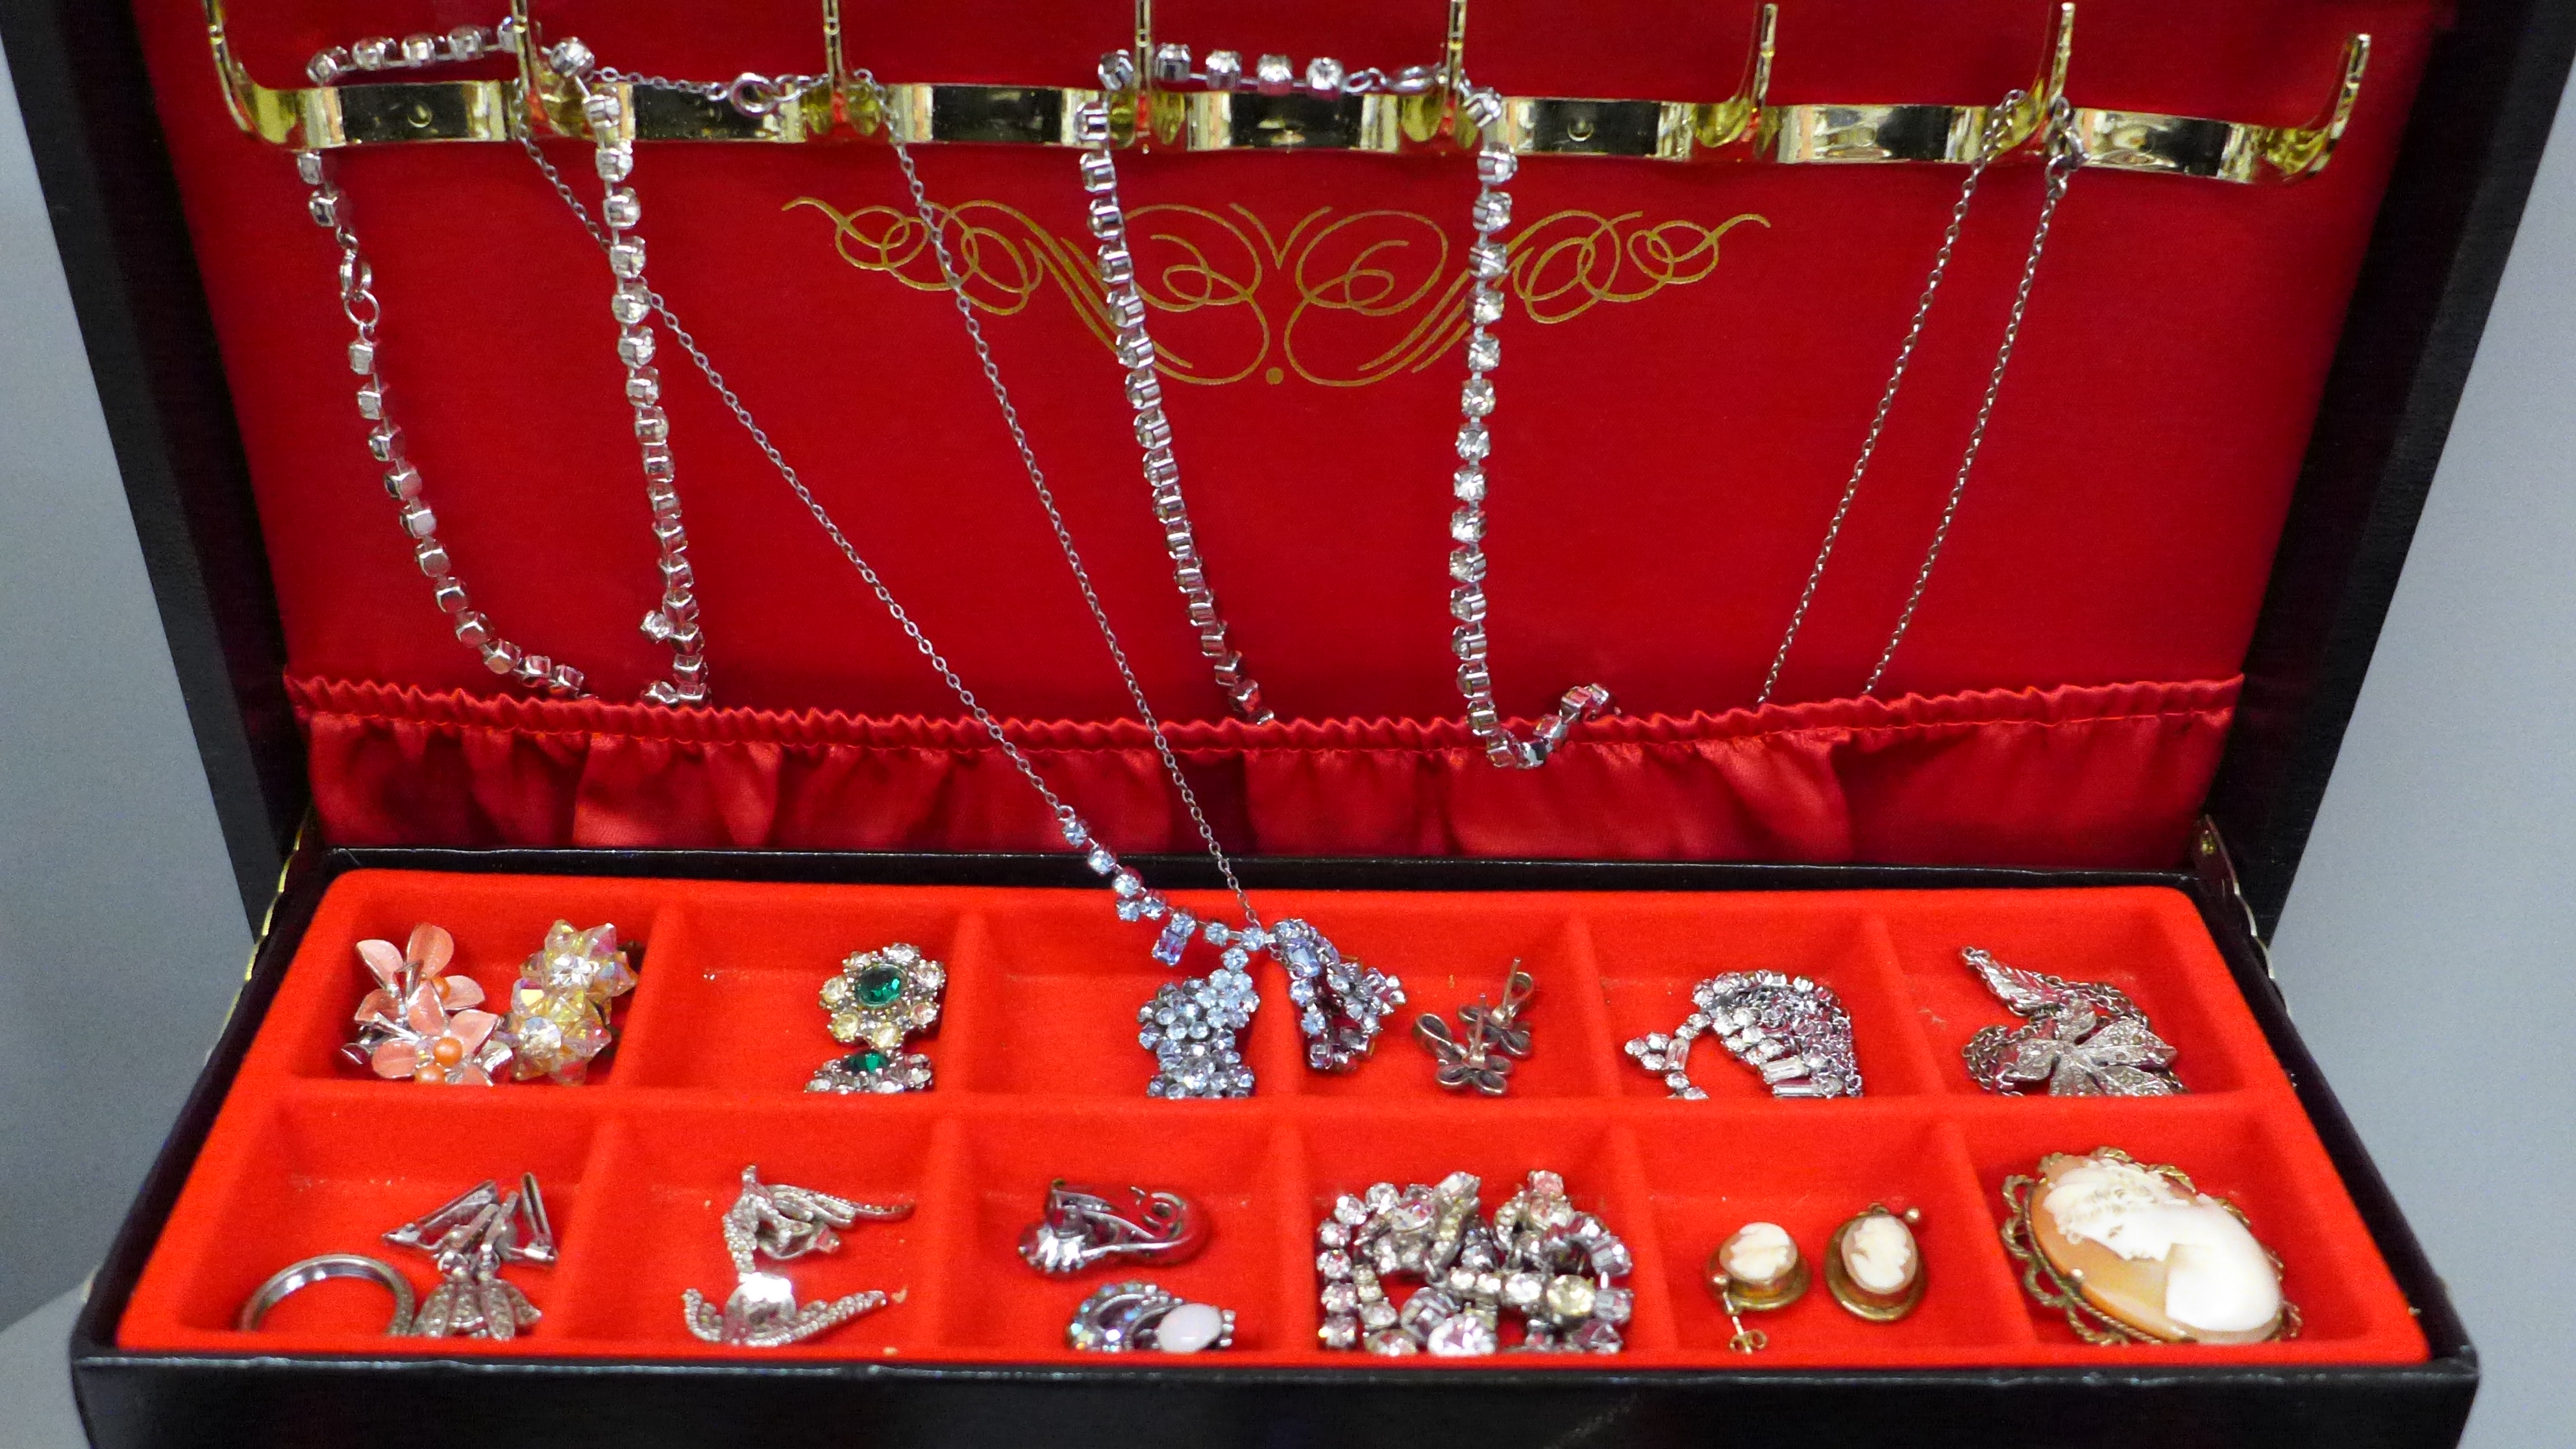 Costume jewellery including silver rings and earrings and a box of earrings, some pairs 9ct gold - Image 3 of 6